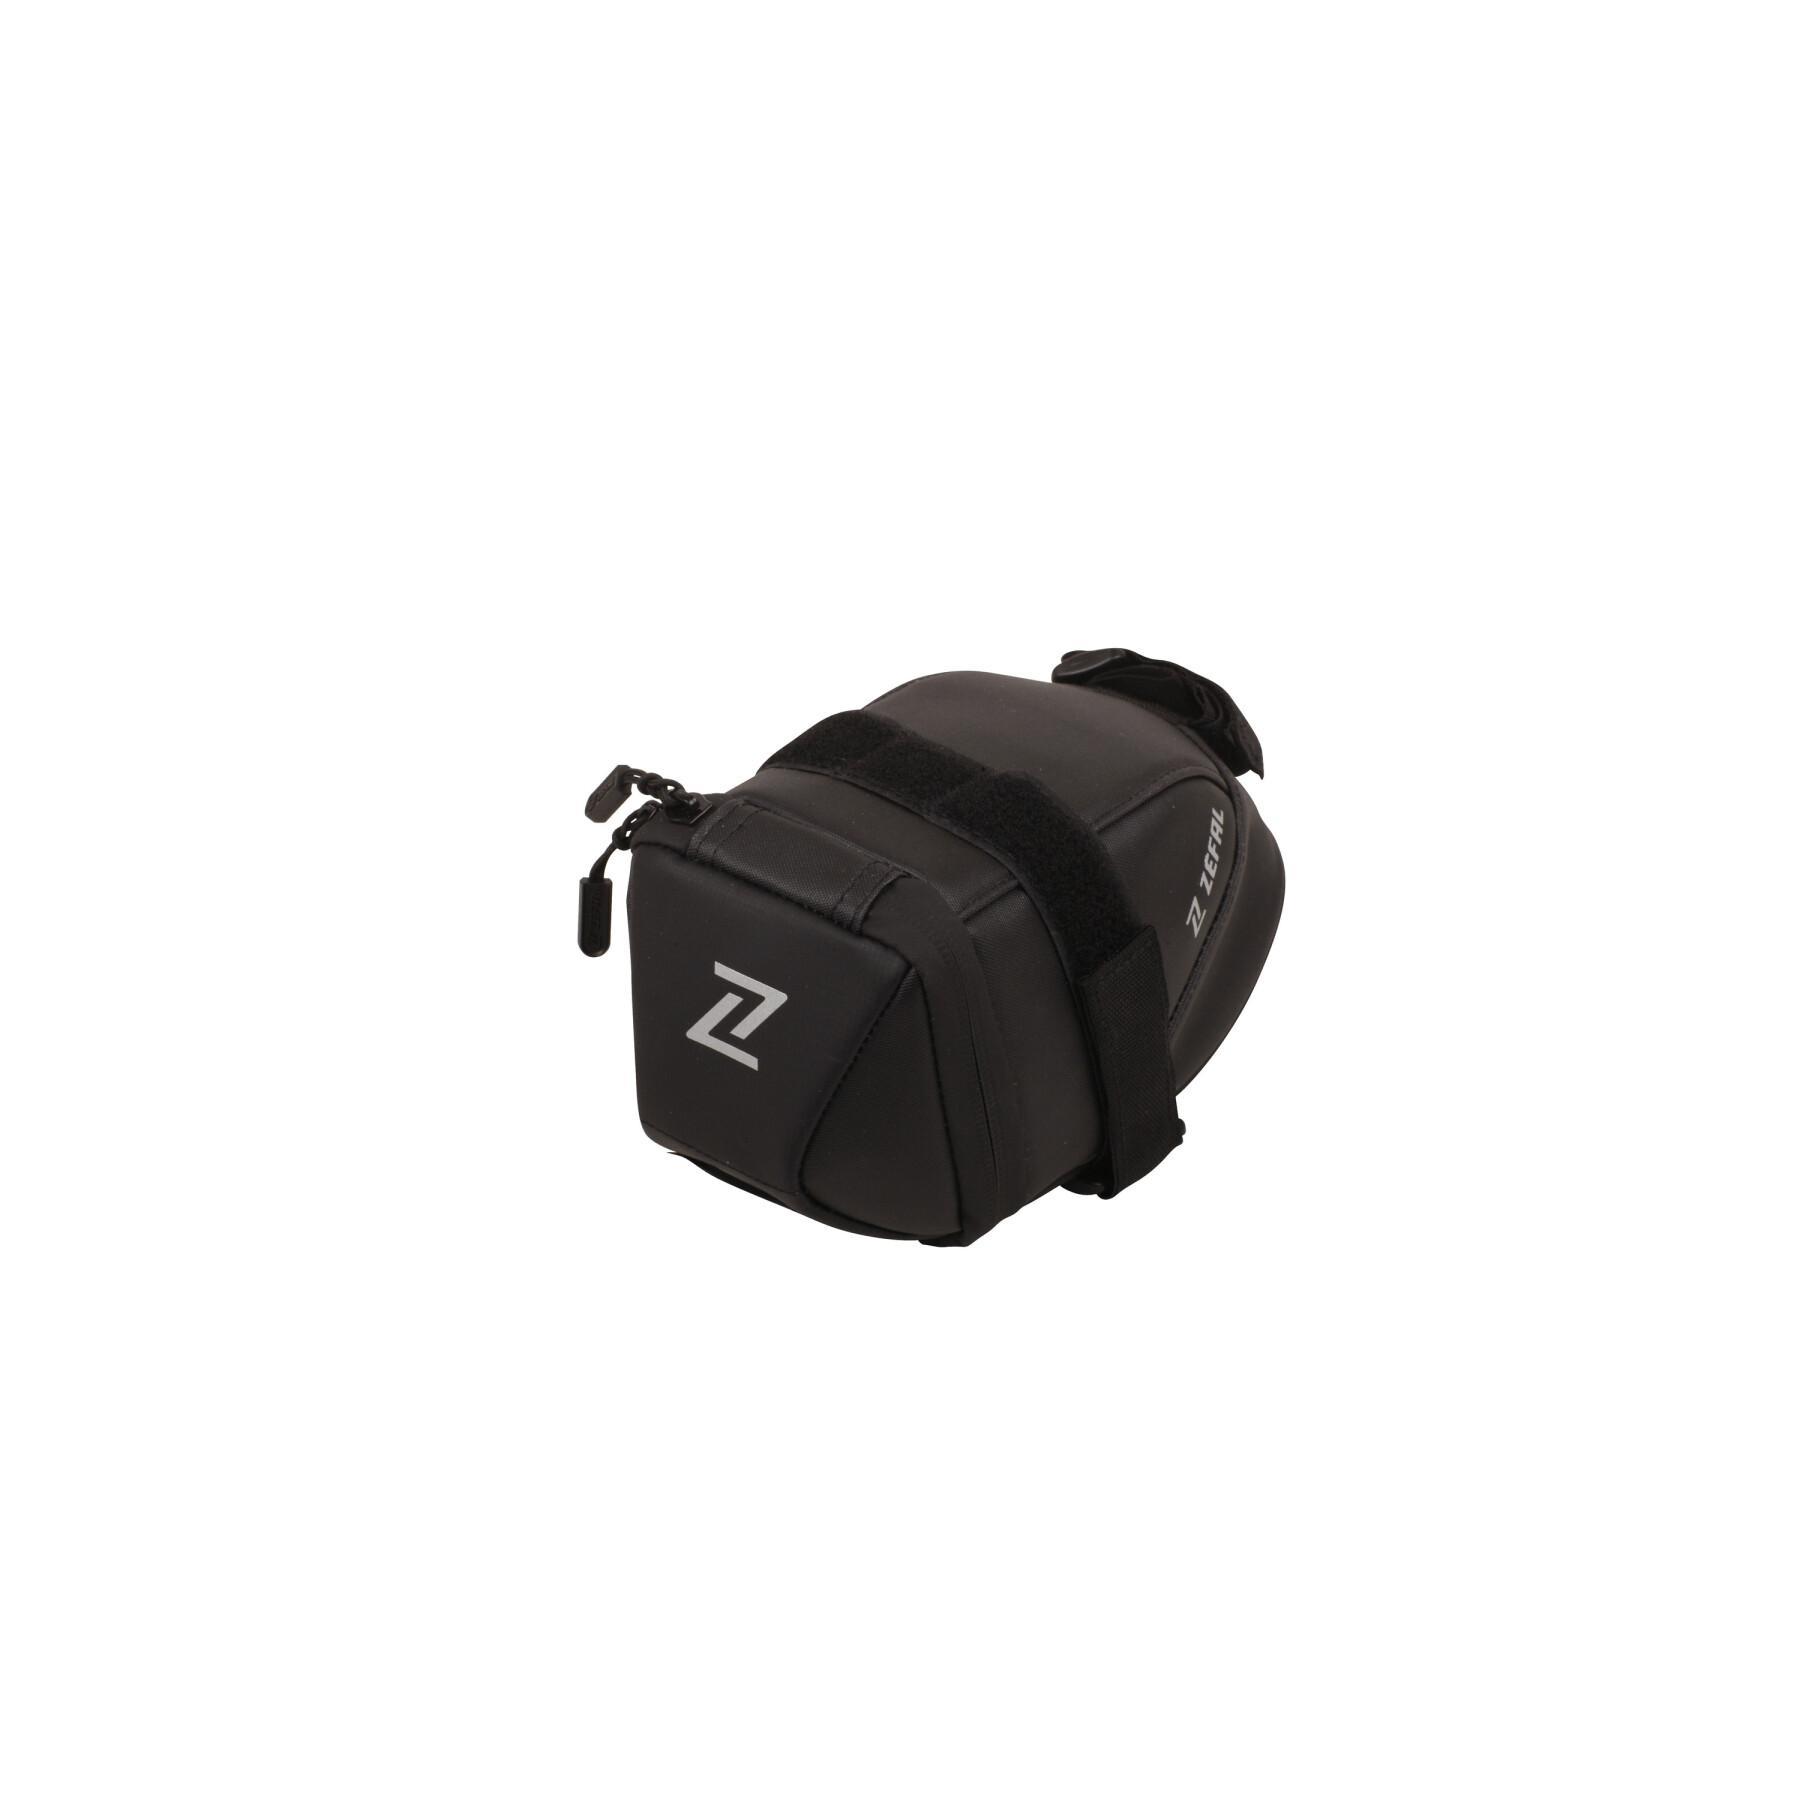 Seatpost bag Zefal Iron pack 2 m-ds